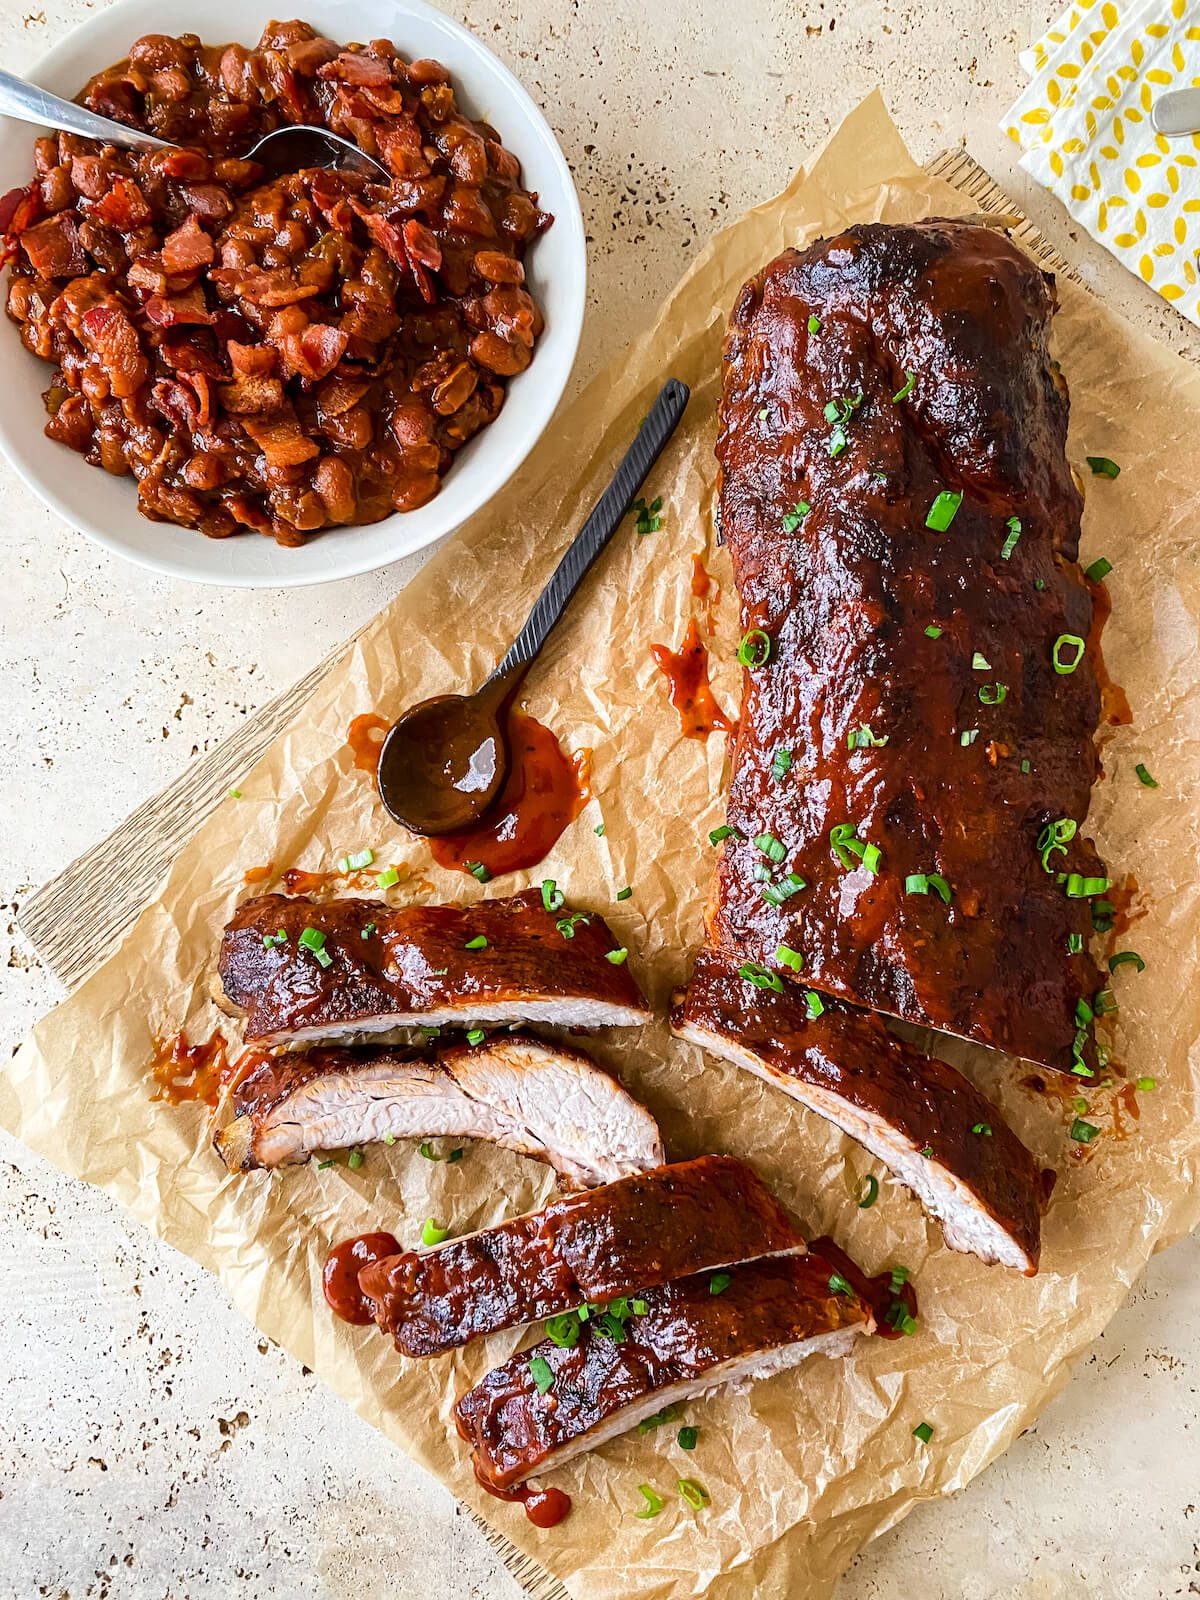 cut up oven baked bbq ribs and baked beans